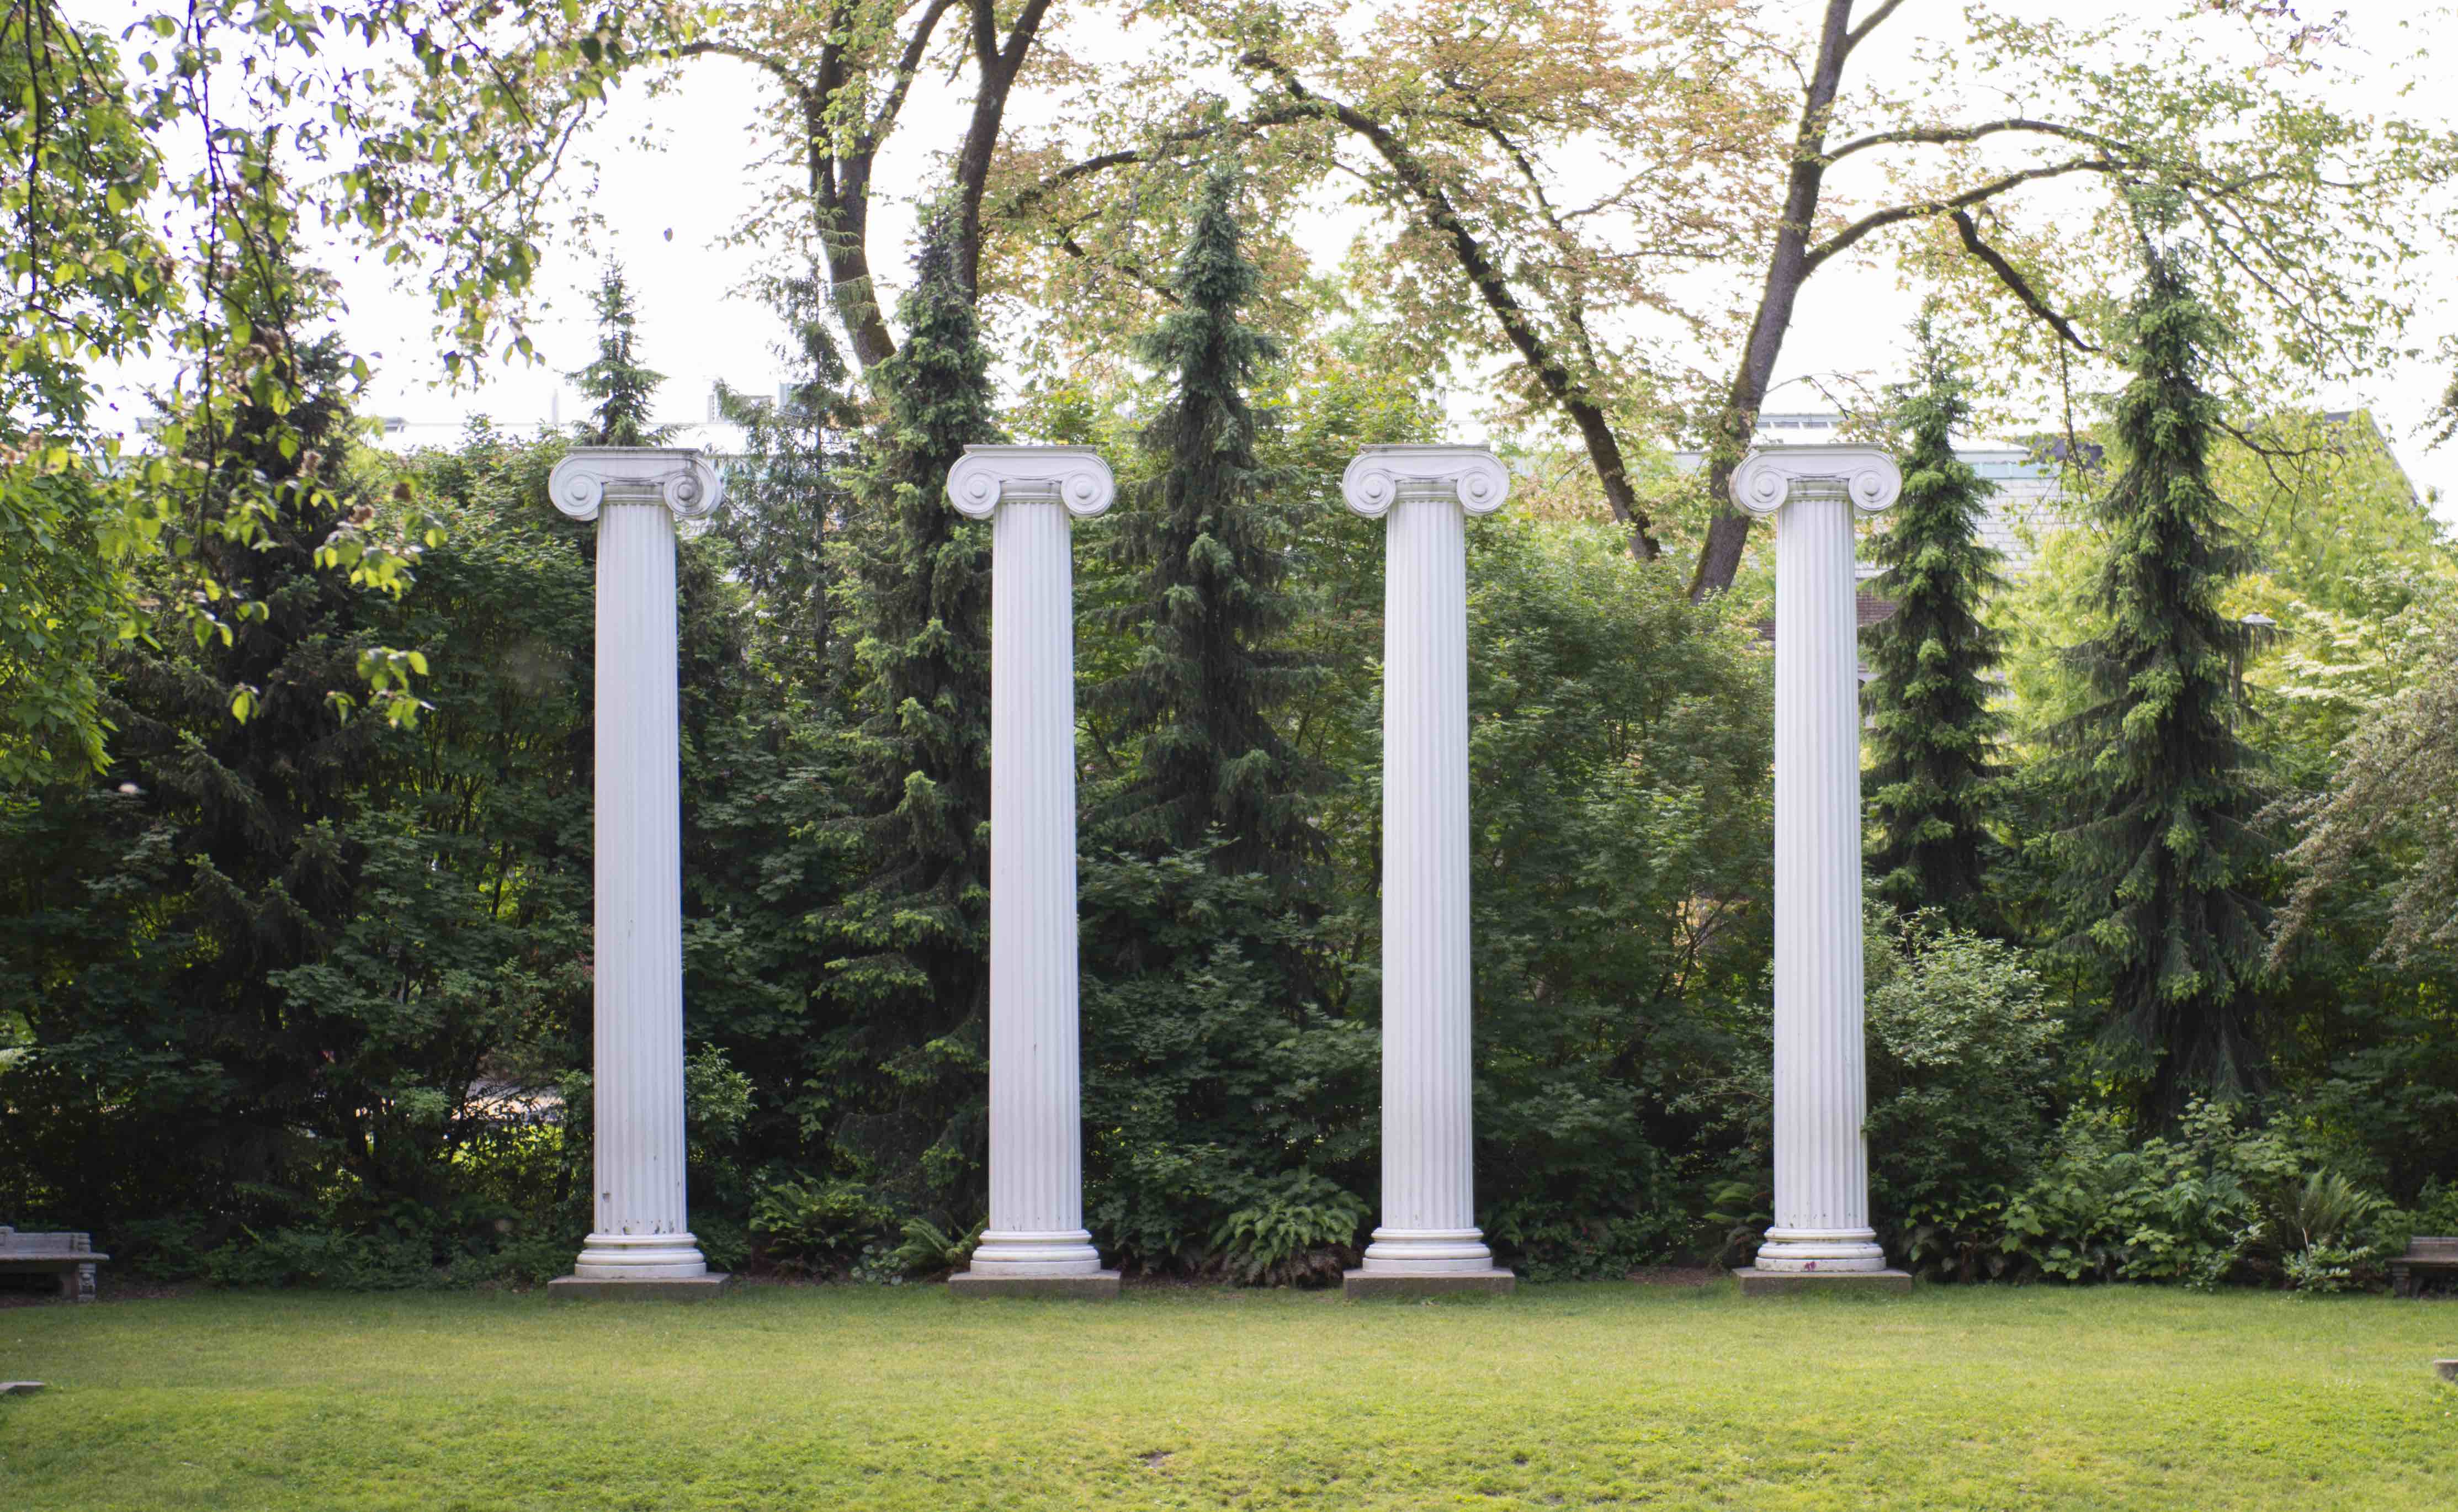 Architectural columns in a grove of trees